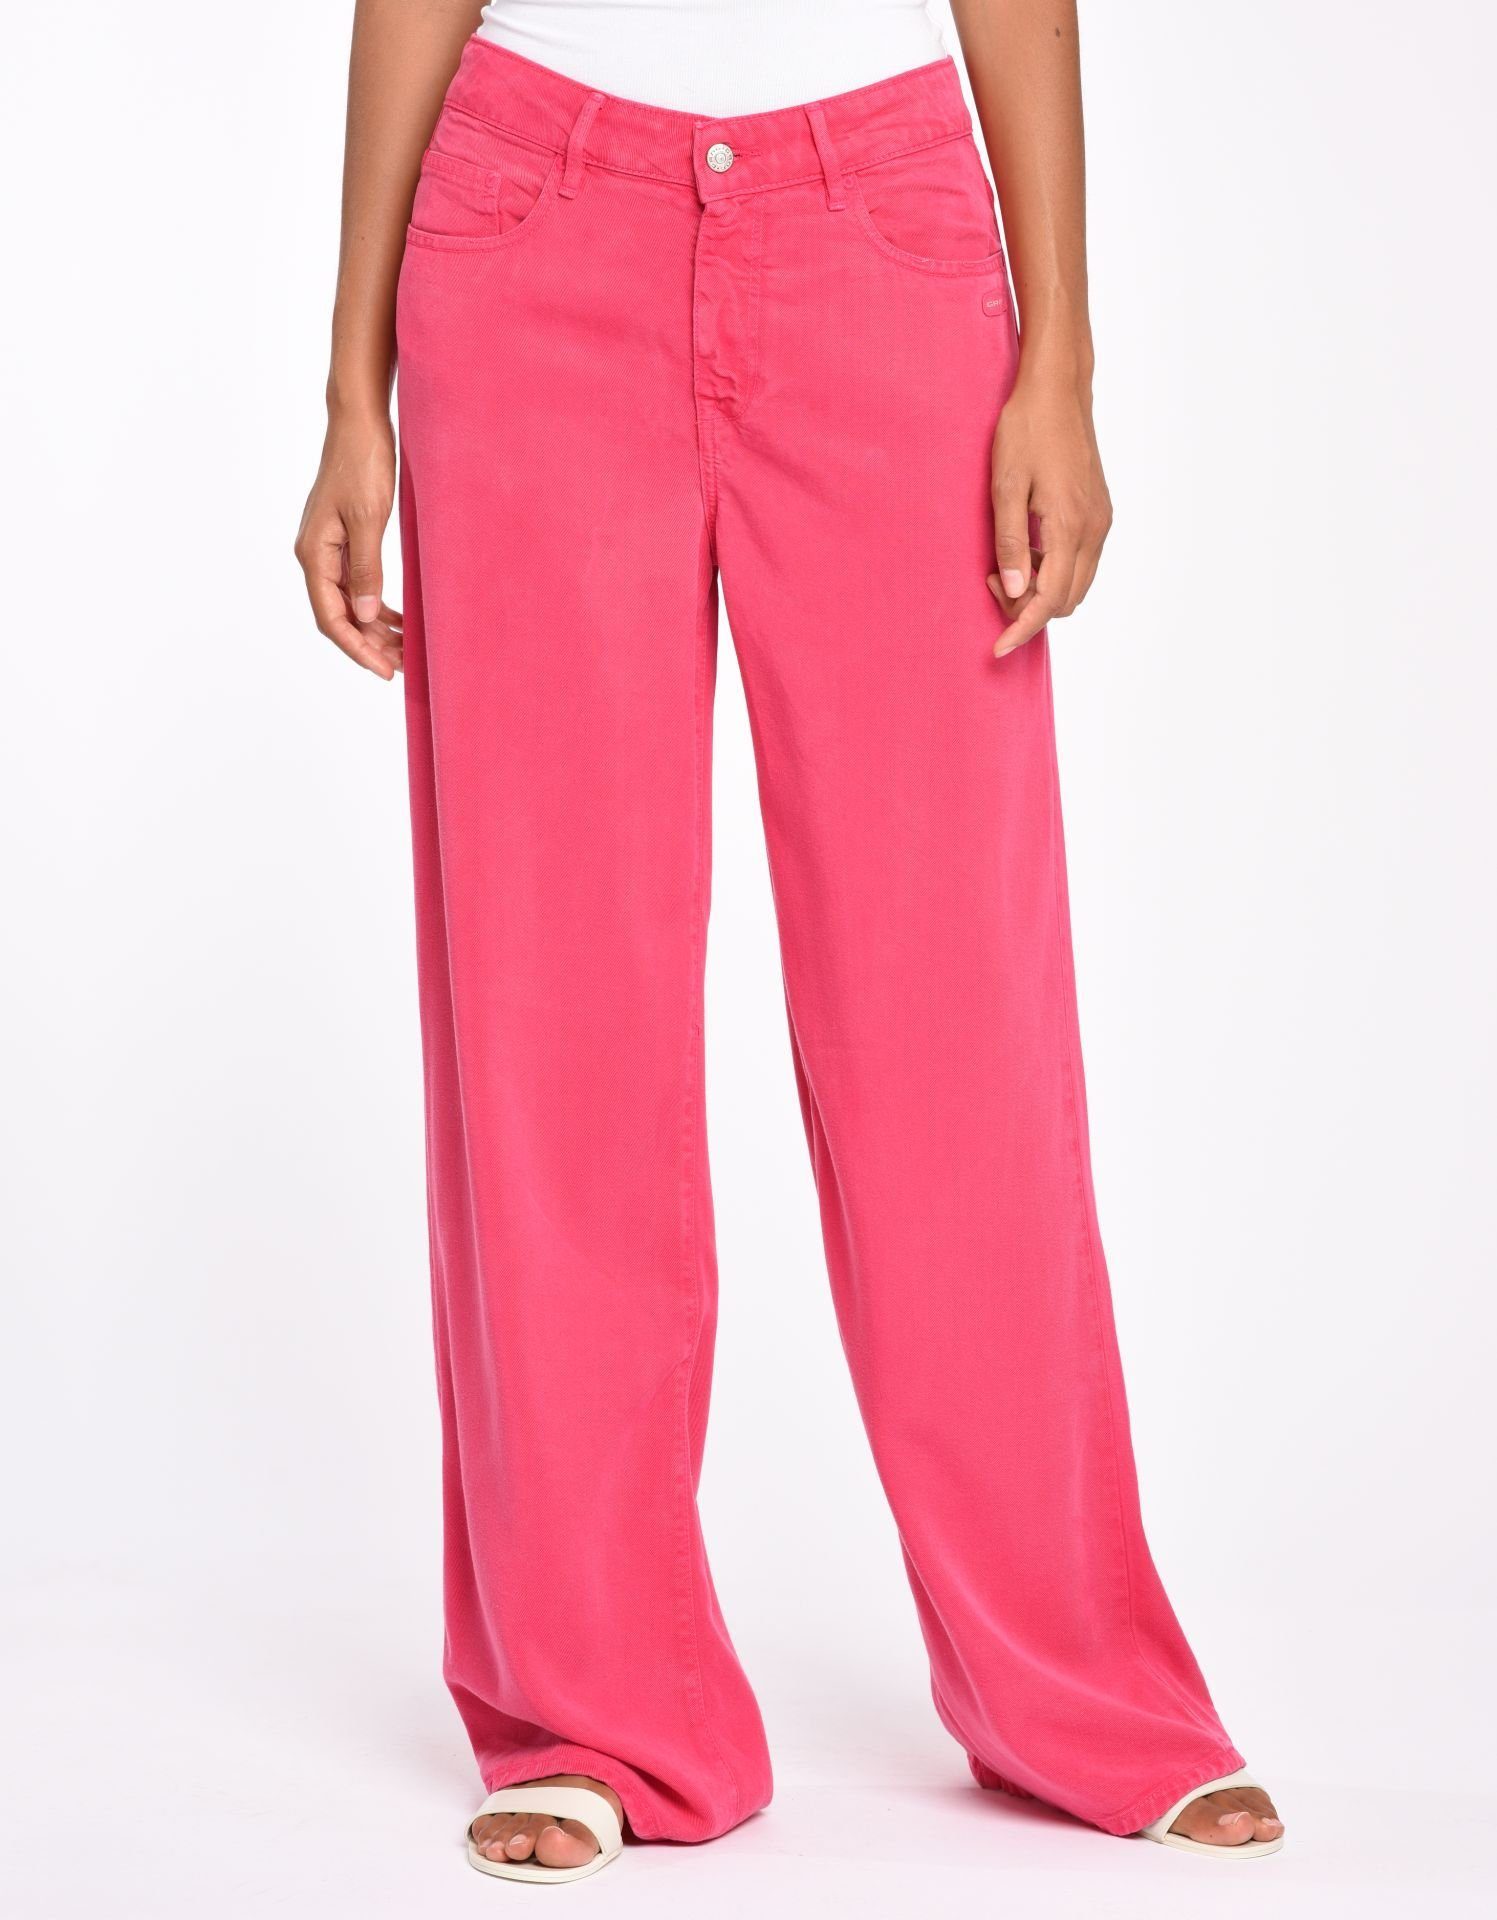 GANG Weite Jeans 6359 pink fuxia